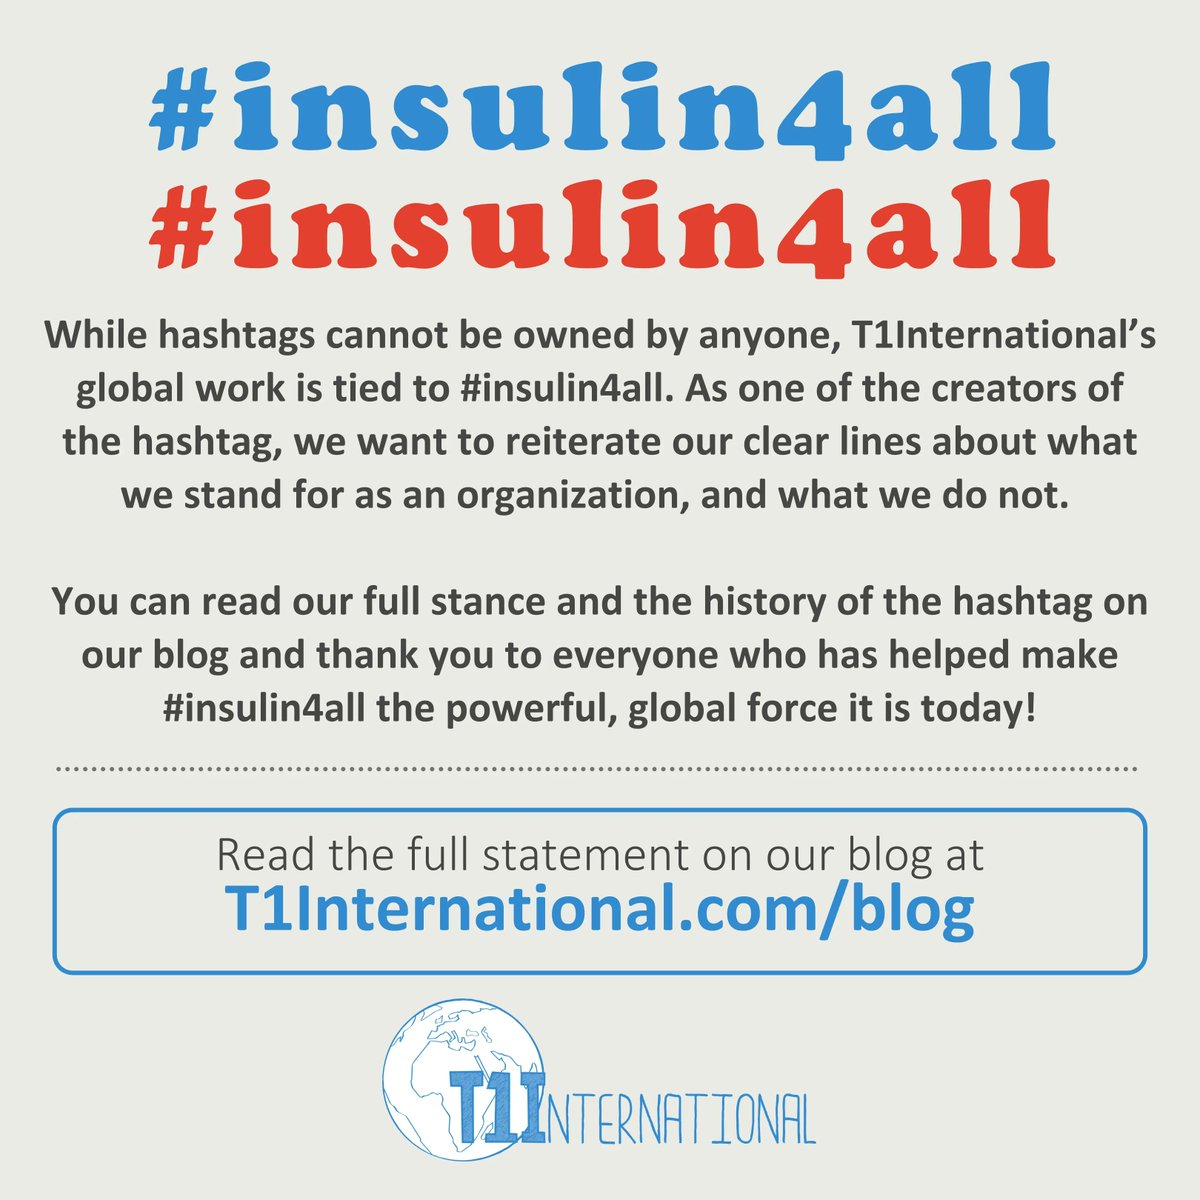 While a hashtag can never truly be owned by anyone, read our statement on the history of #insulin4all and why it must be inclusive and kind to all at: t1international.com/blog/2020/08/2…